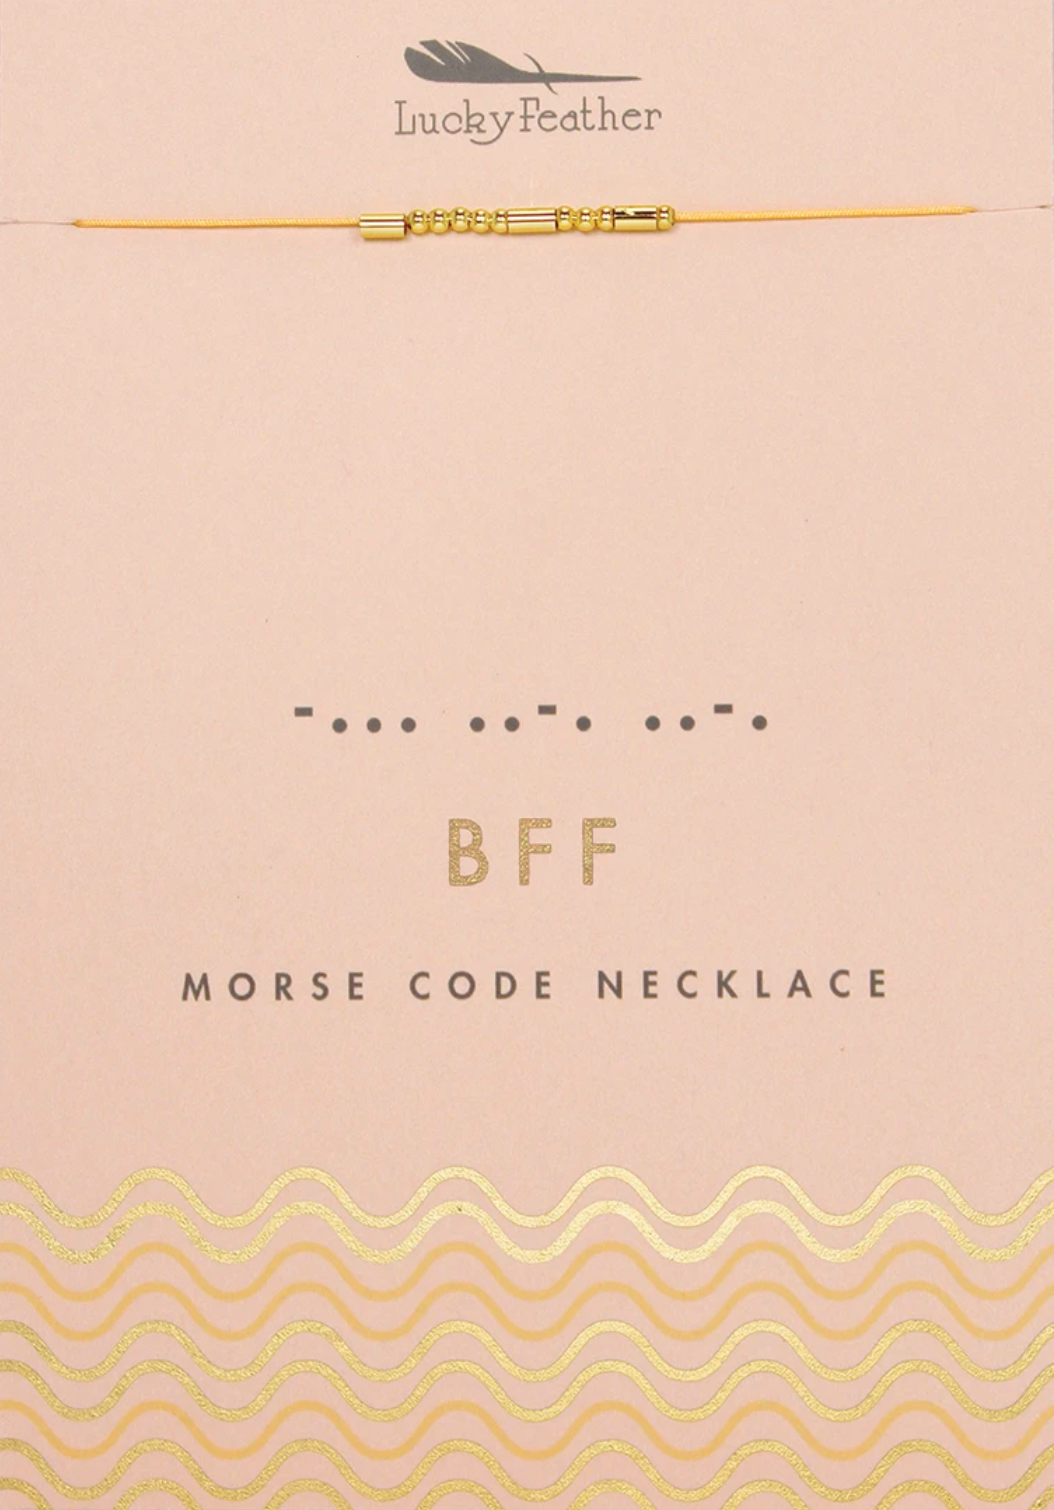 Lucky Feather BFF Morse Code Necklace